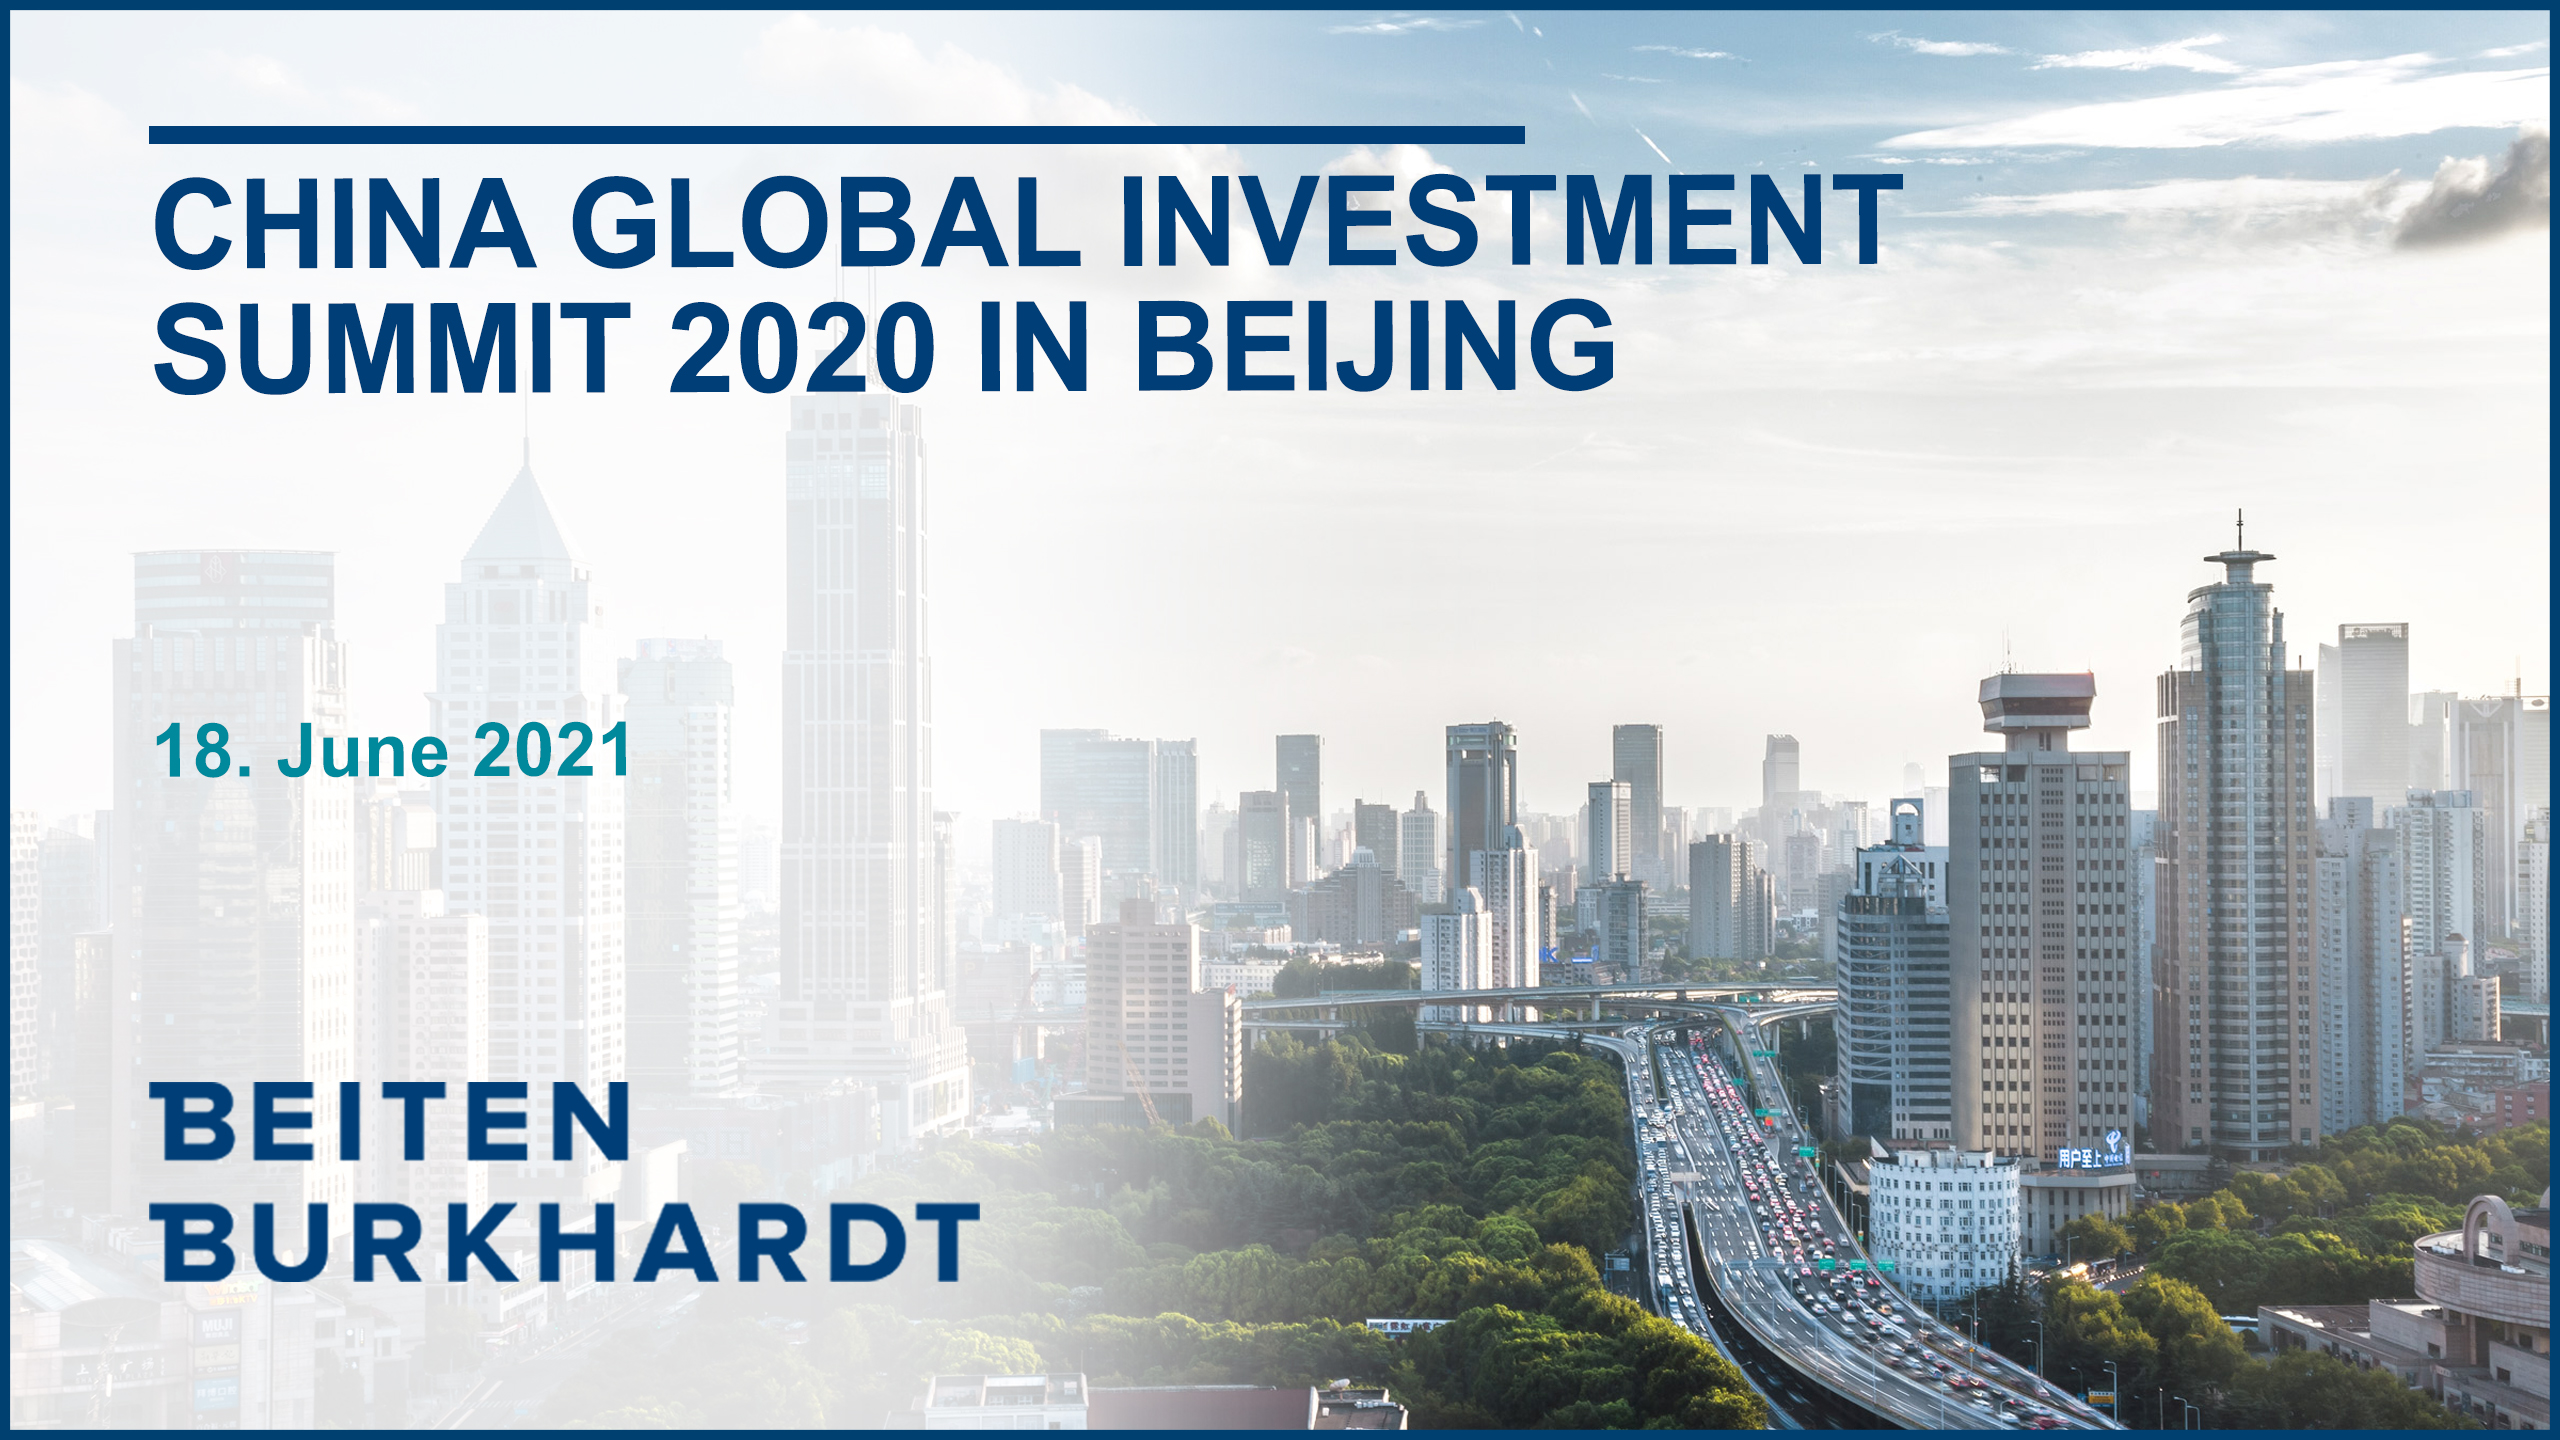 China Global Investment Summit 2020 in Beijing